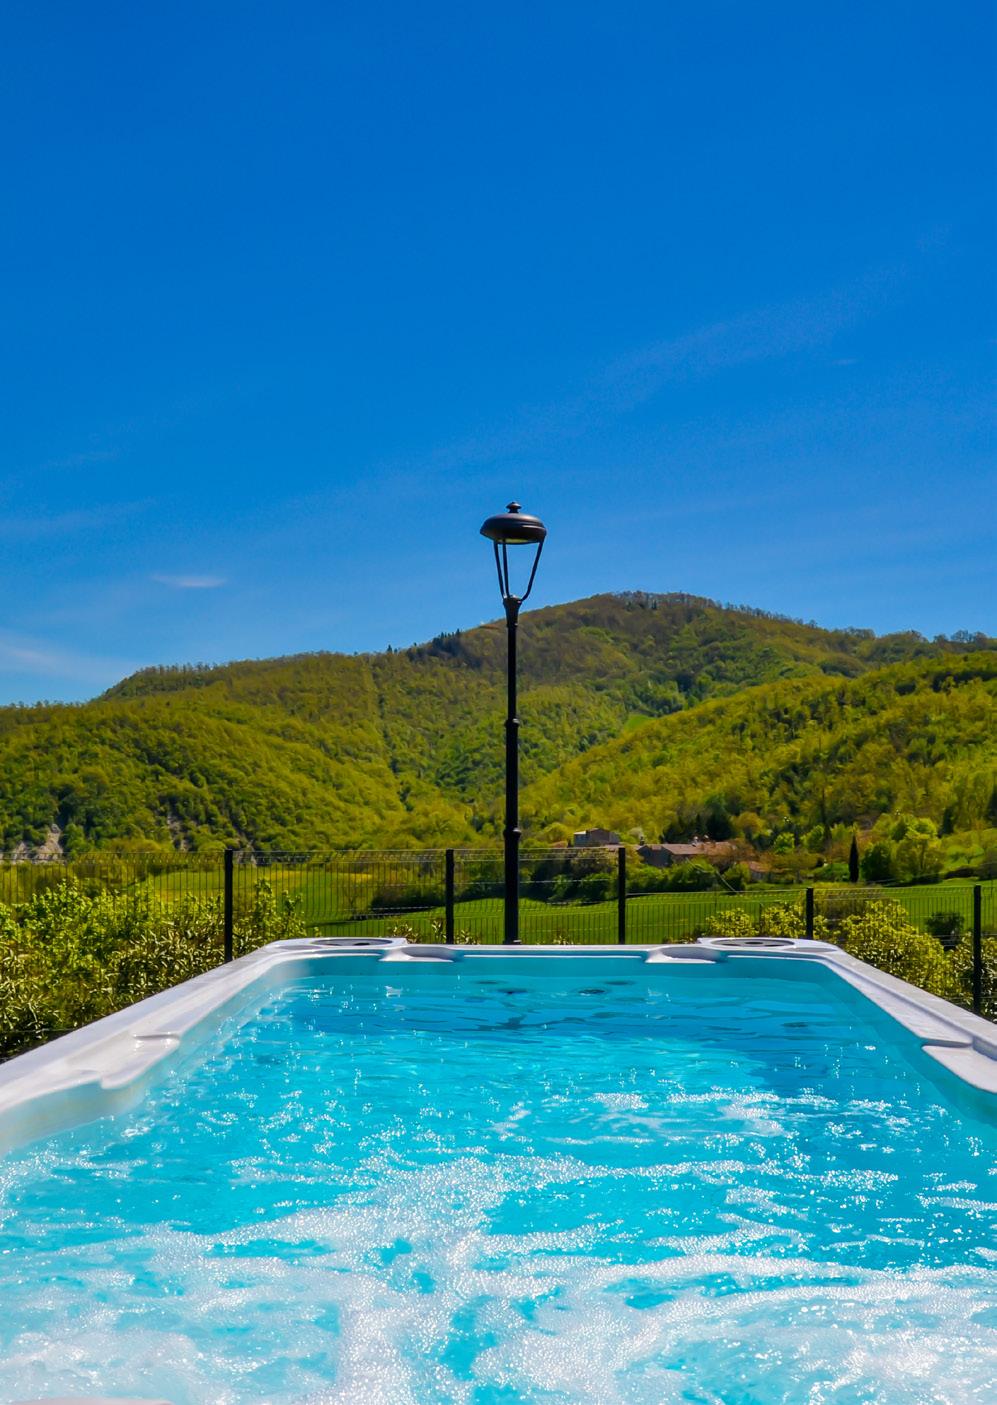 Borgo Santa Cecilia sits on a quiet location 14 kilometers away from Gubbio. Thanks to its position, the estate overlooks the Appennini, Monte Tezio and Monte Subasio and offers wonderful landscapes.